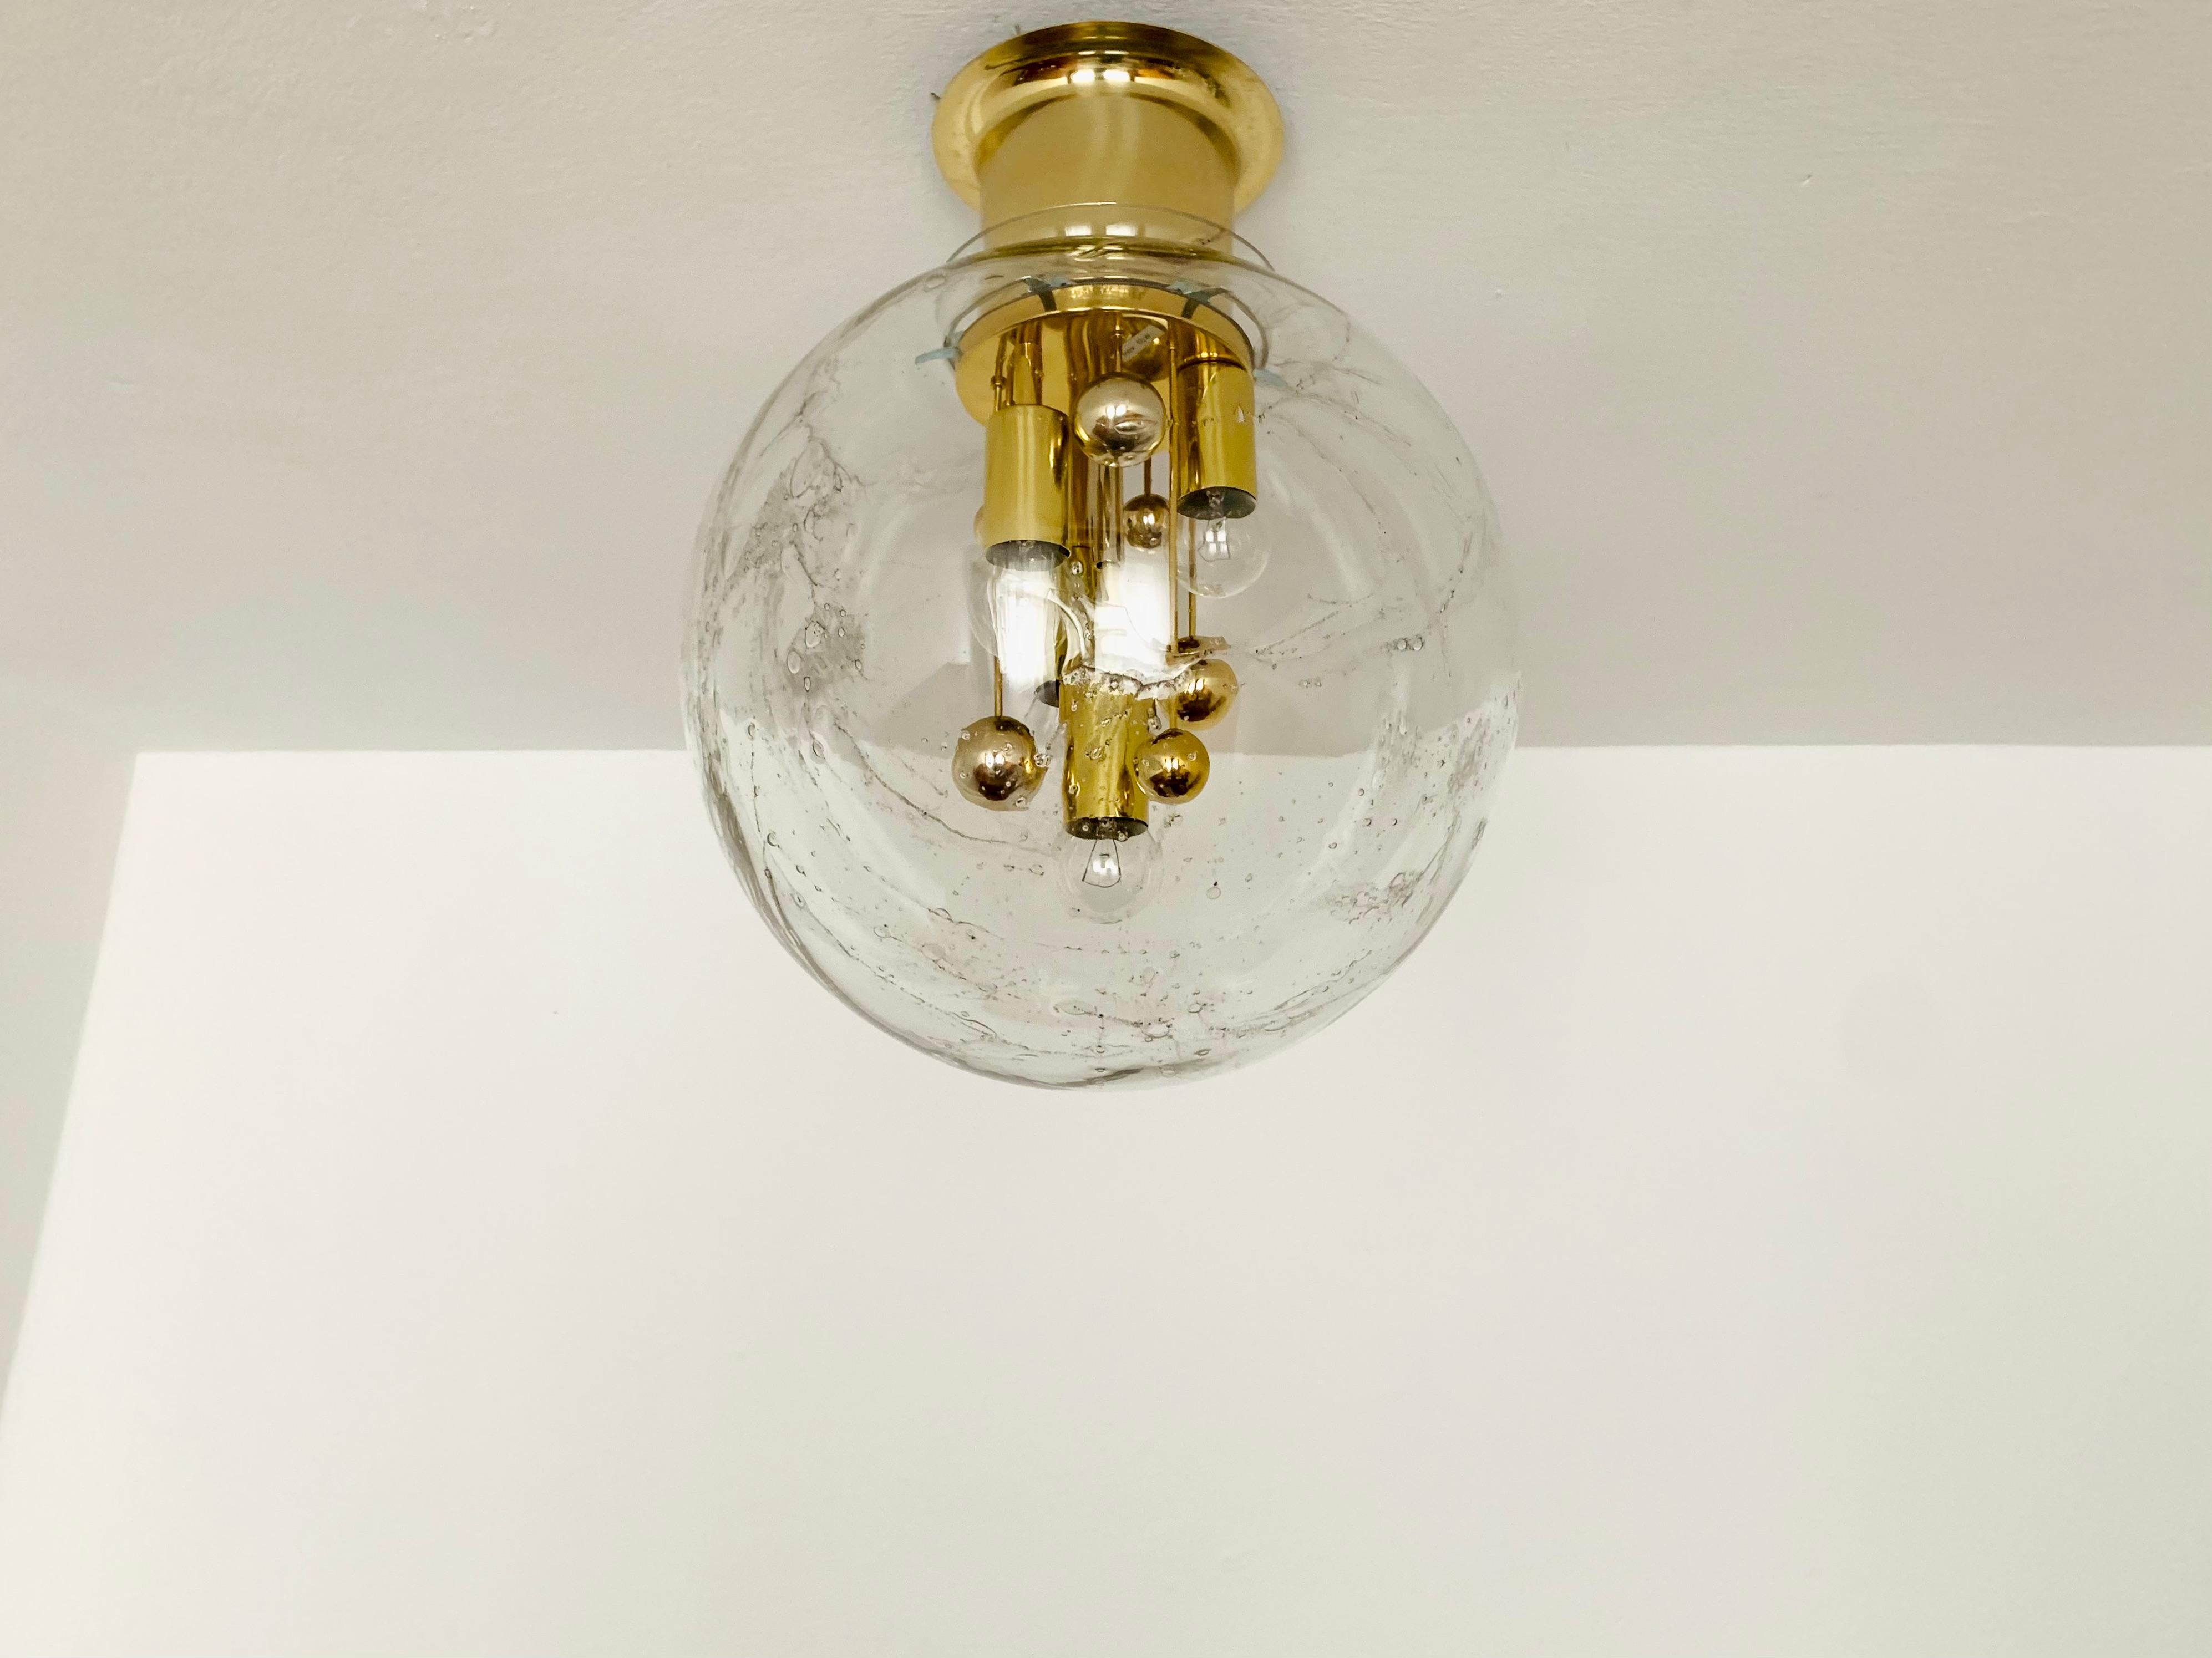 Very beautiful and large ice glass Big Ball ceiling lamp by Doria from the 1960s.
Very elegant Hollywood Regency design with a fantastically glamorous look.
The structure in the glass creates a very sparkling light.

Manufacturer: